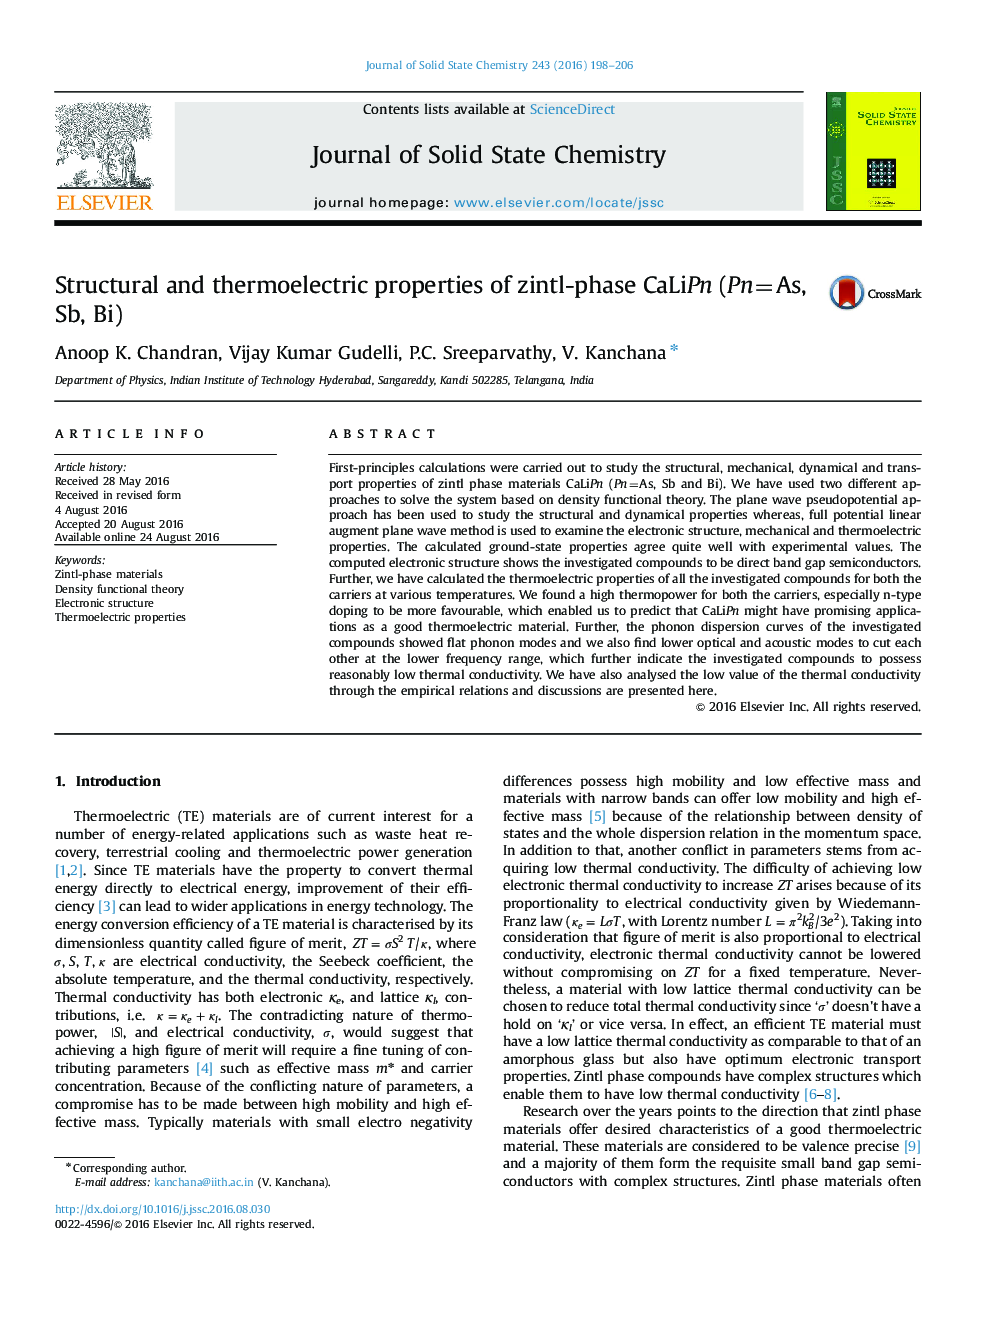 Structural and thermoelectric properties of zintl-phase CaLiPn (Pn=As, Sb, Bi)